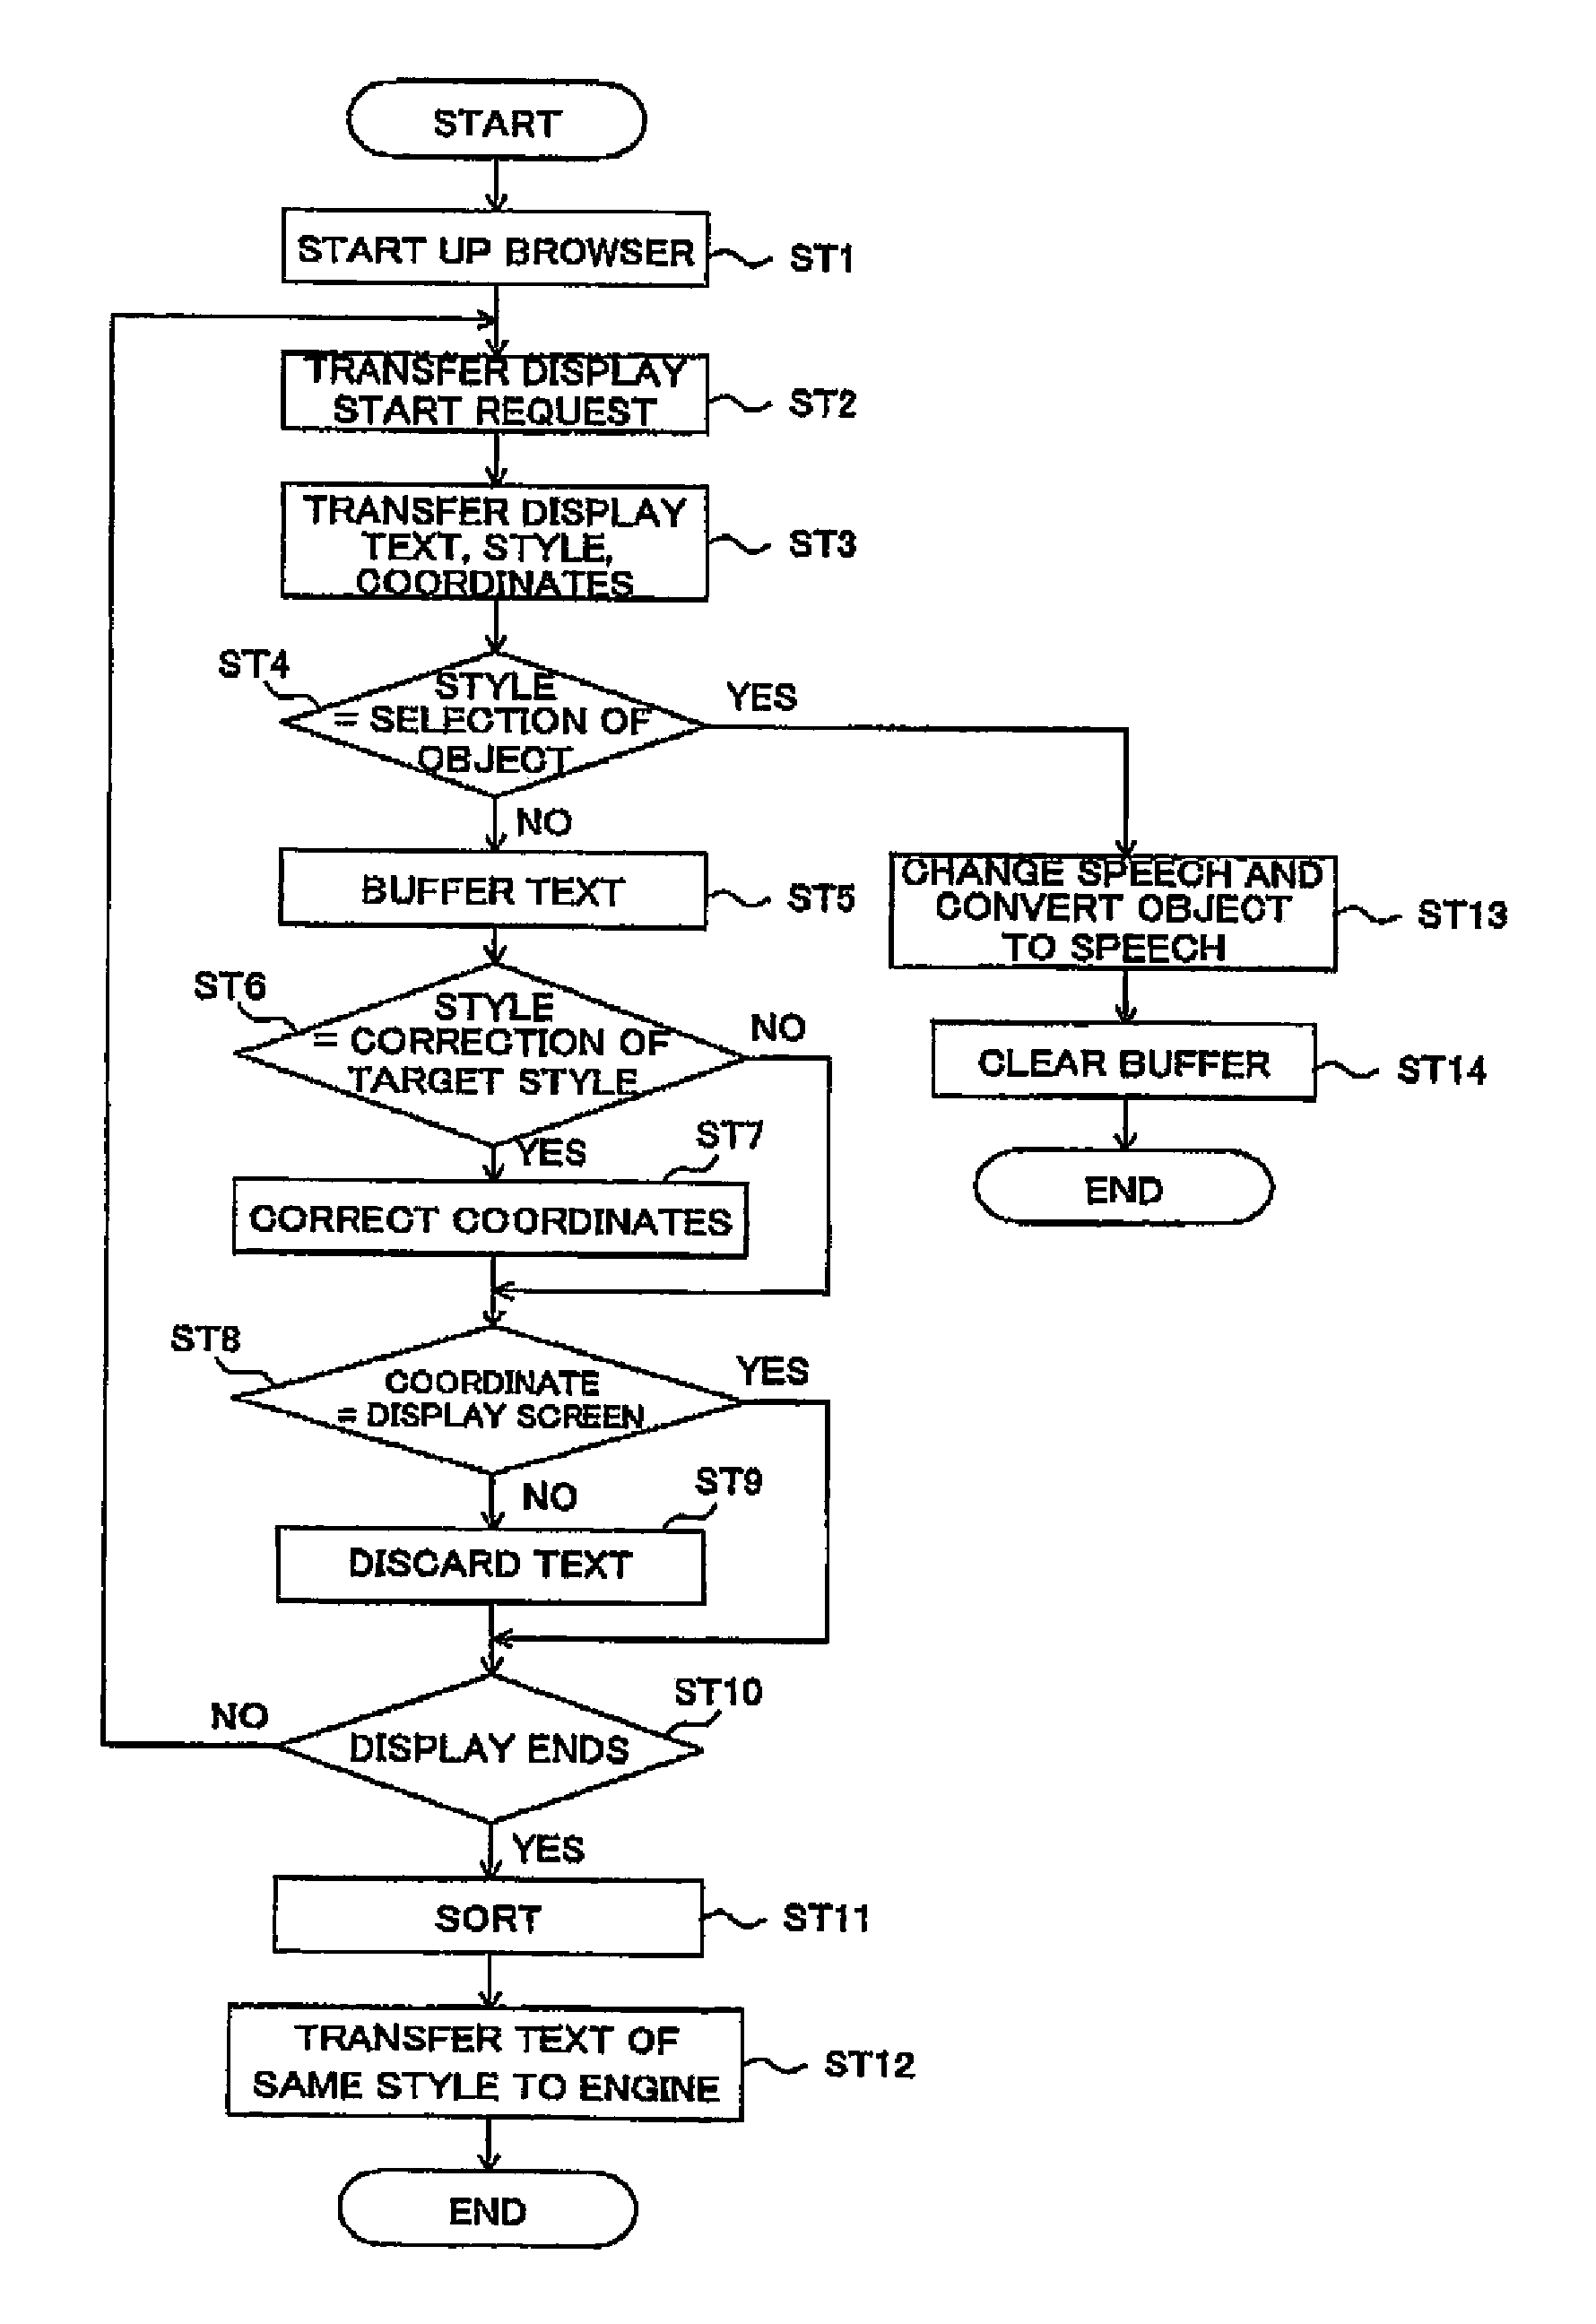 Text information display apparatus equipped with speech synthesis function, speech synthesis method of same